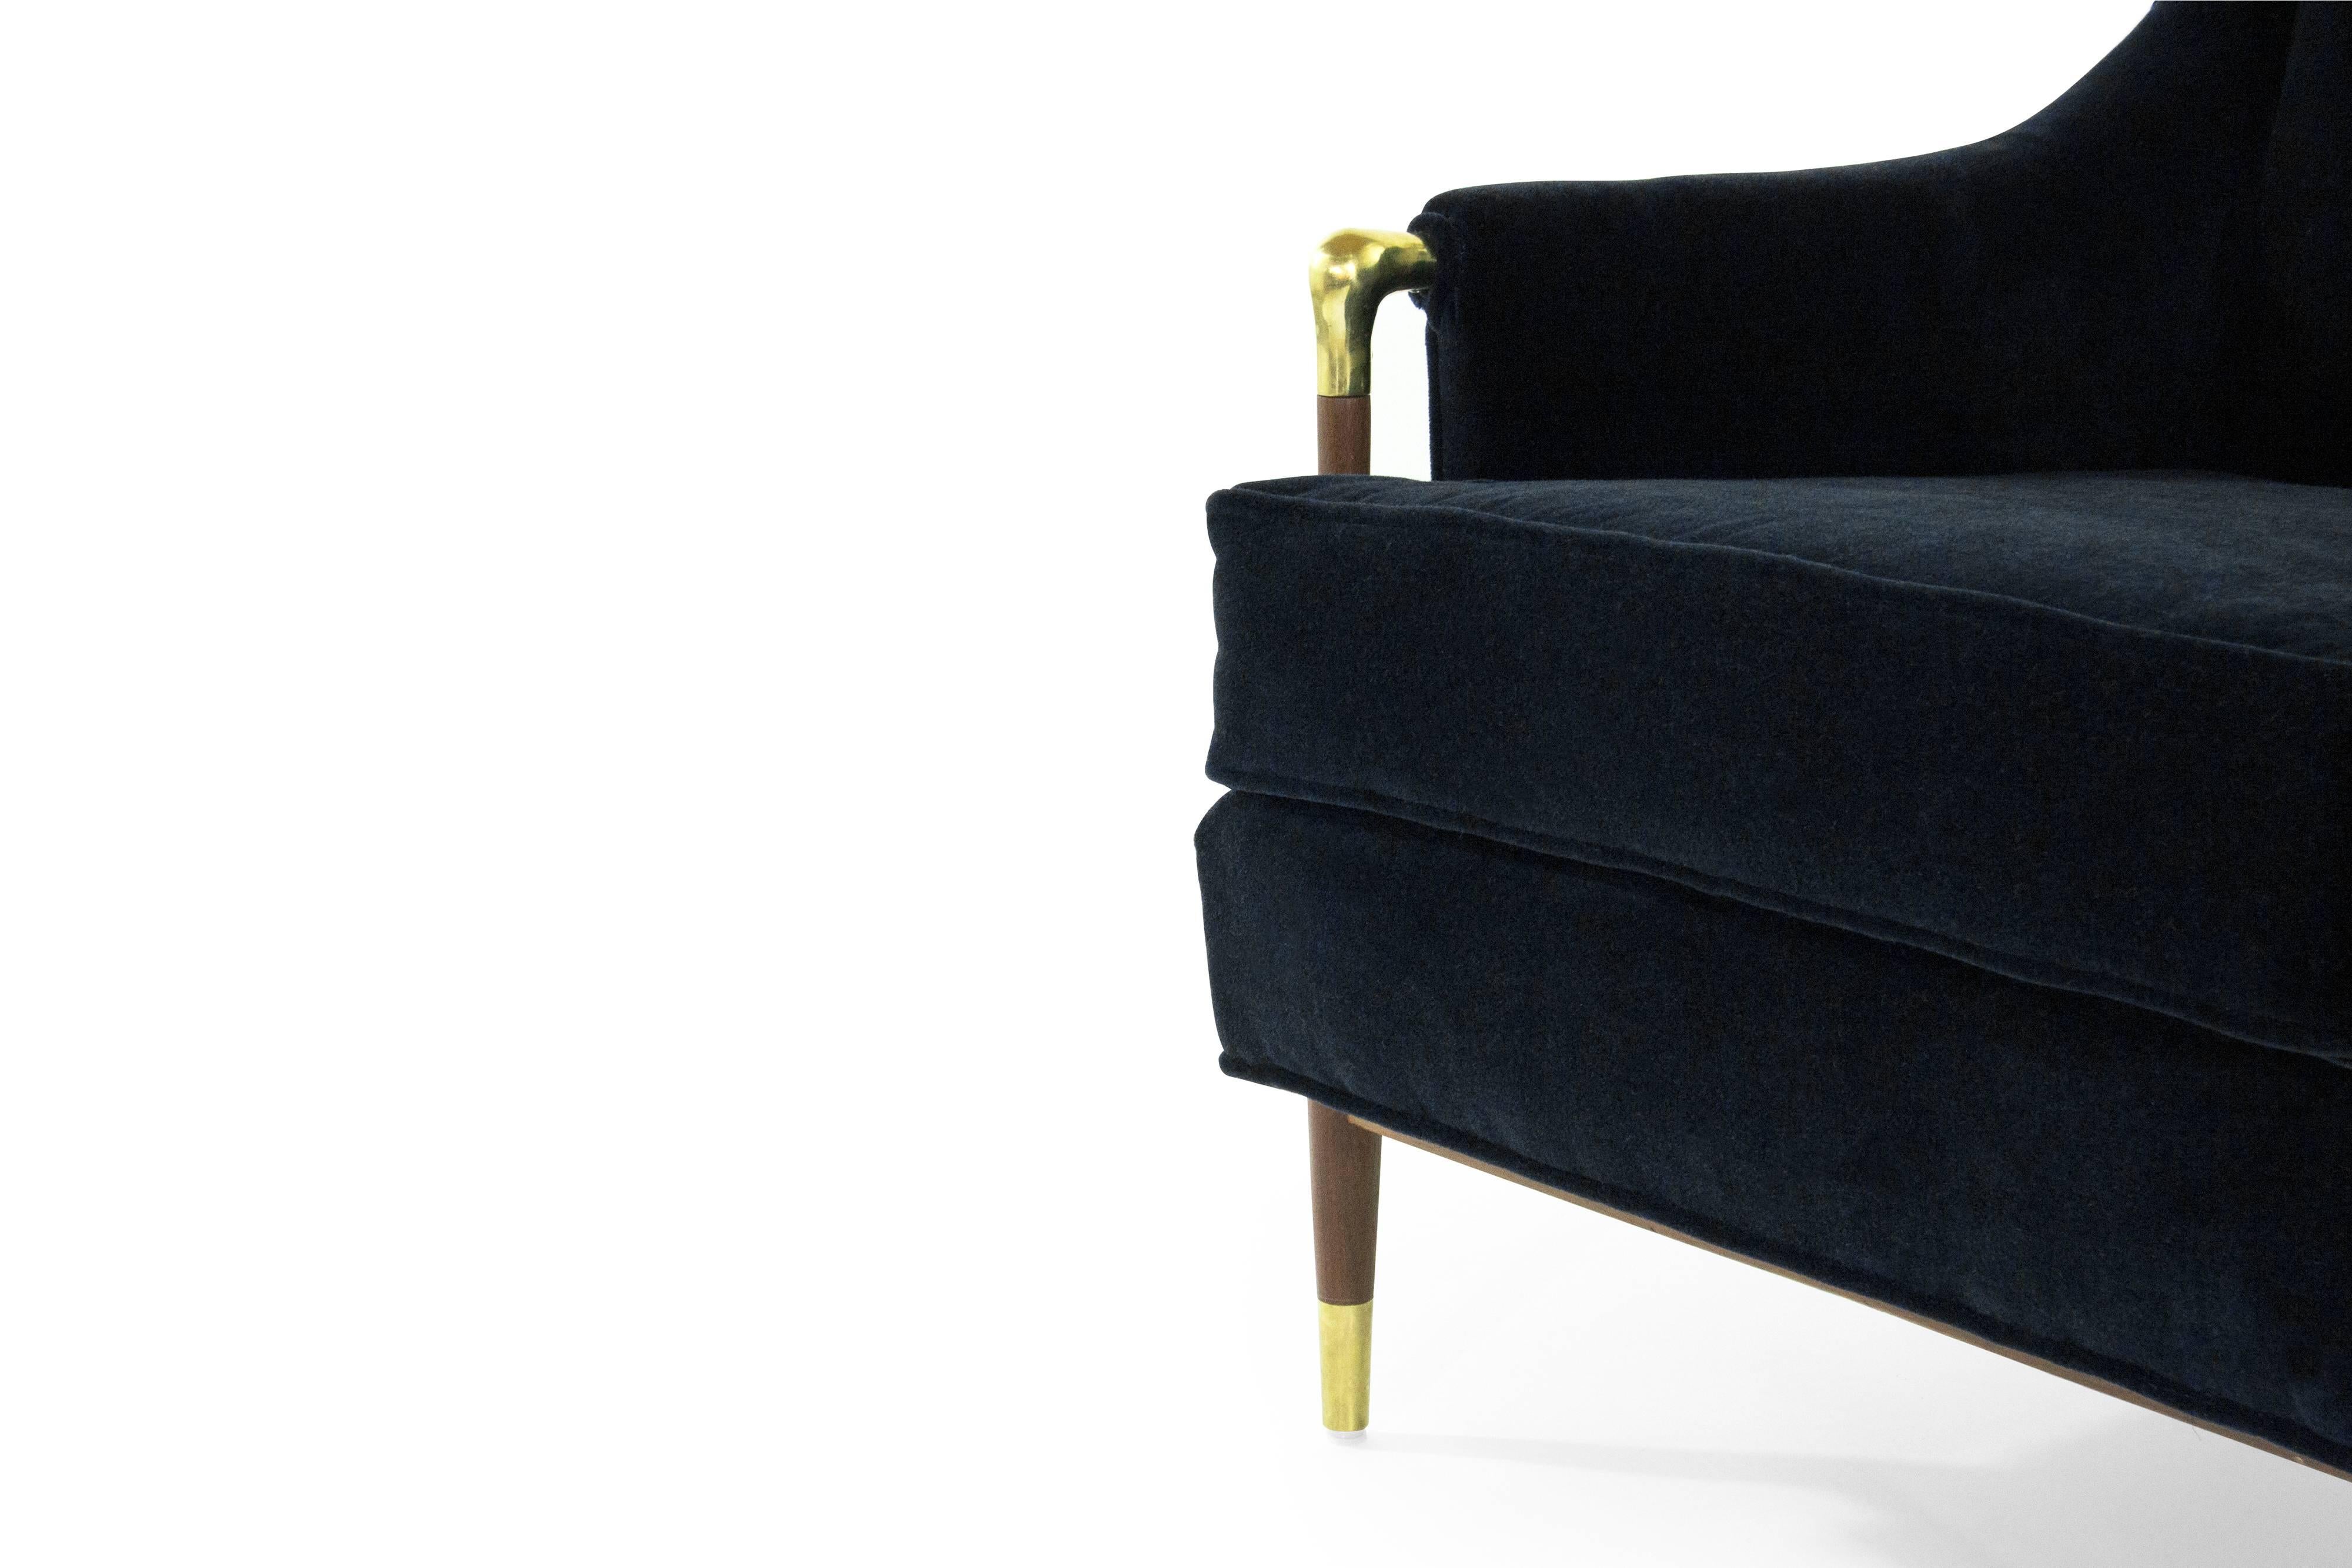 Brass Sculptural Gio Ponti Style Lounge Chair, 1950s